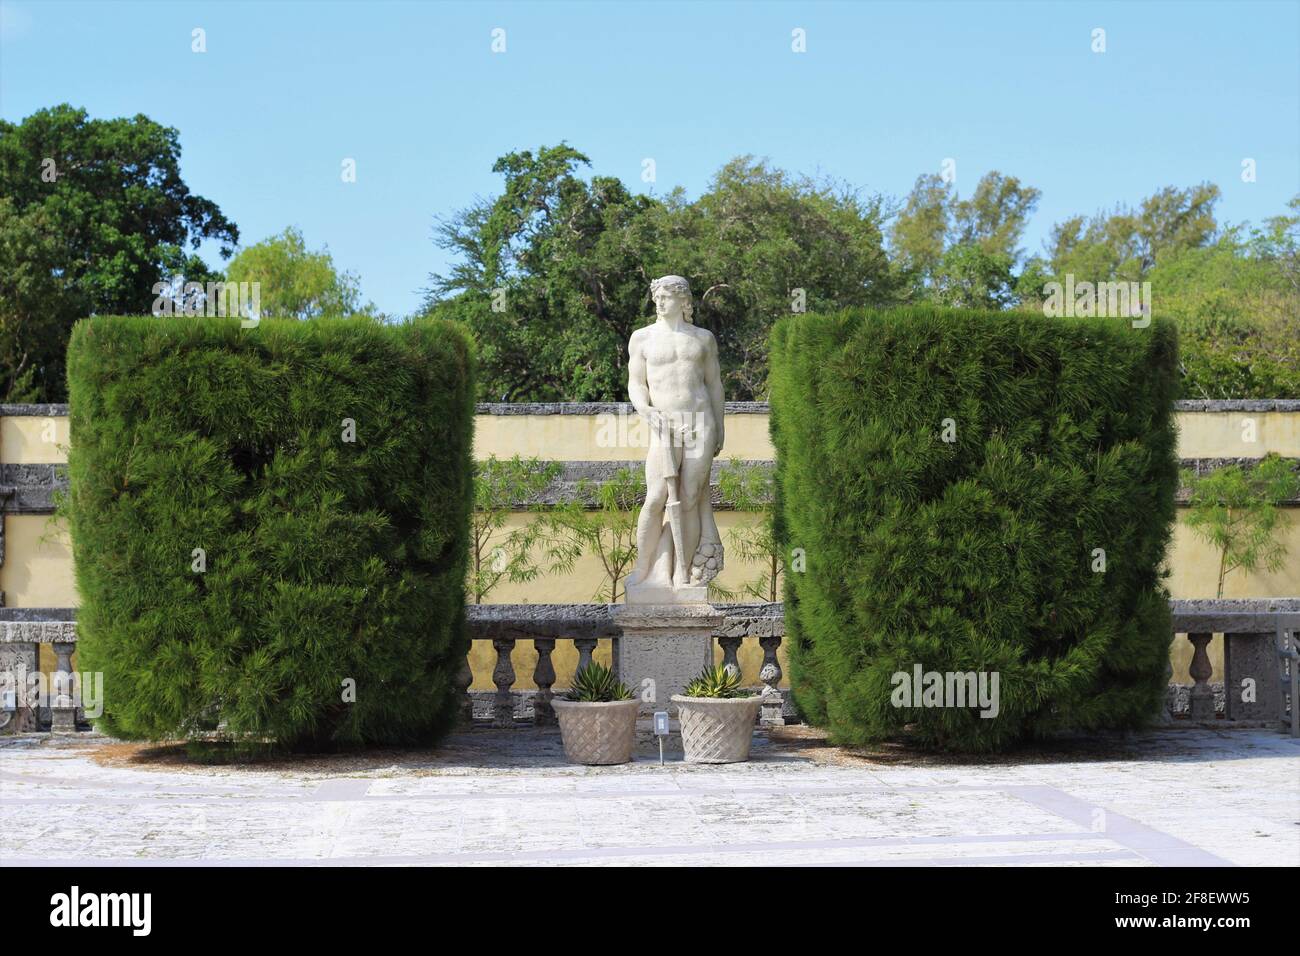 Outdoor view of The Vizcaya Museum and Garden. Nature landscape with a classic statue sculpture between two large square cut hedges. Stock Photo